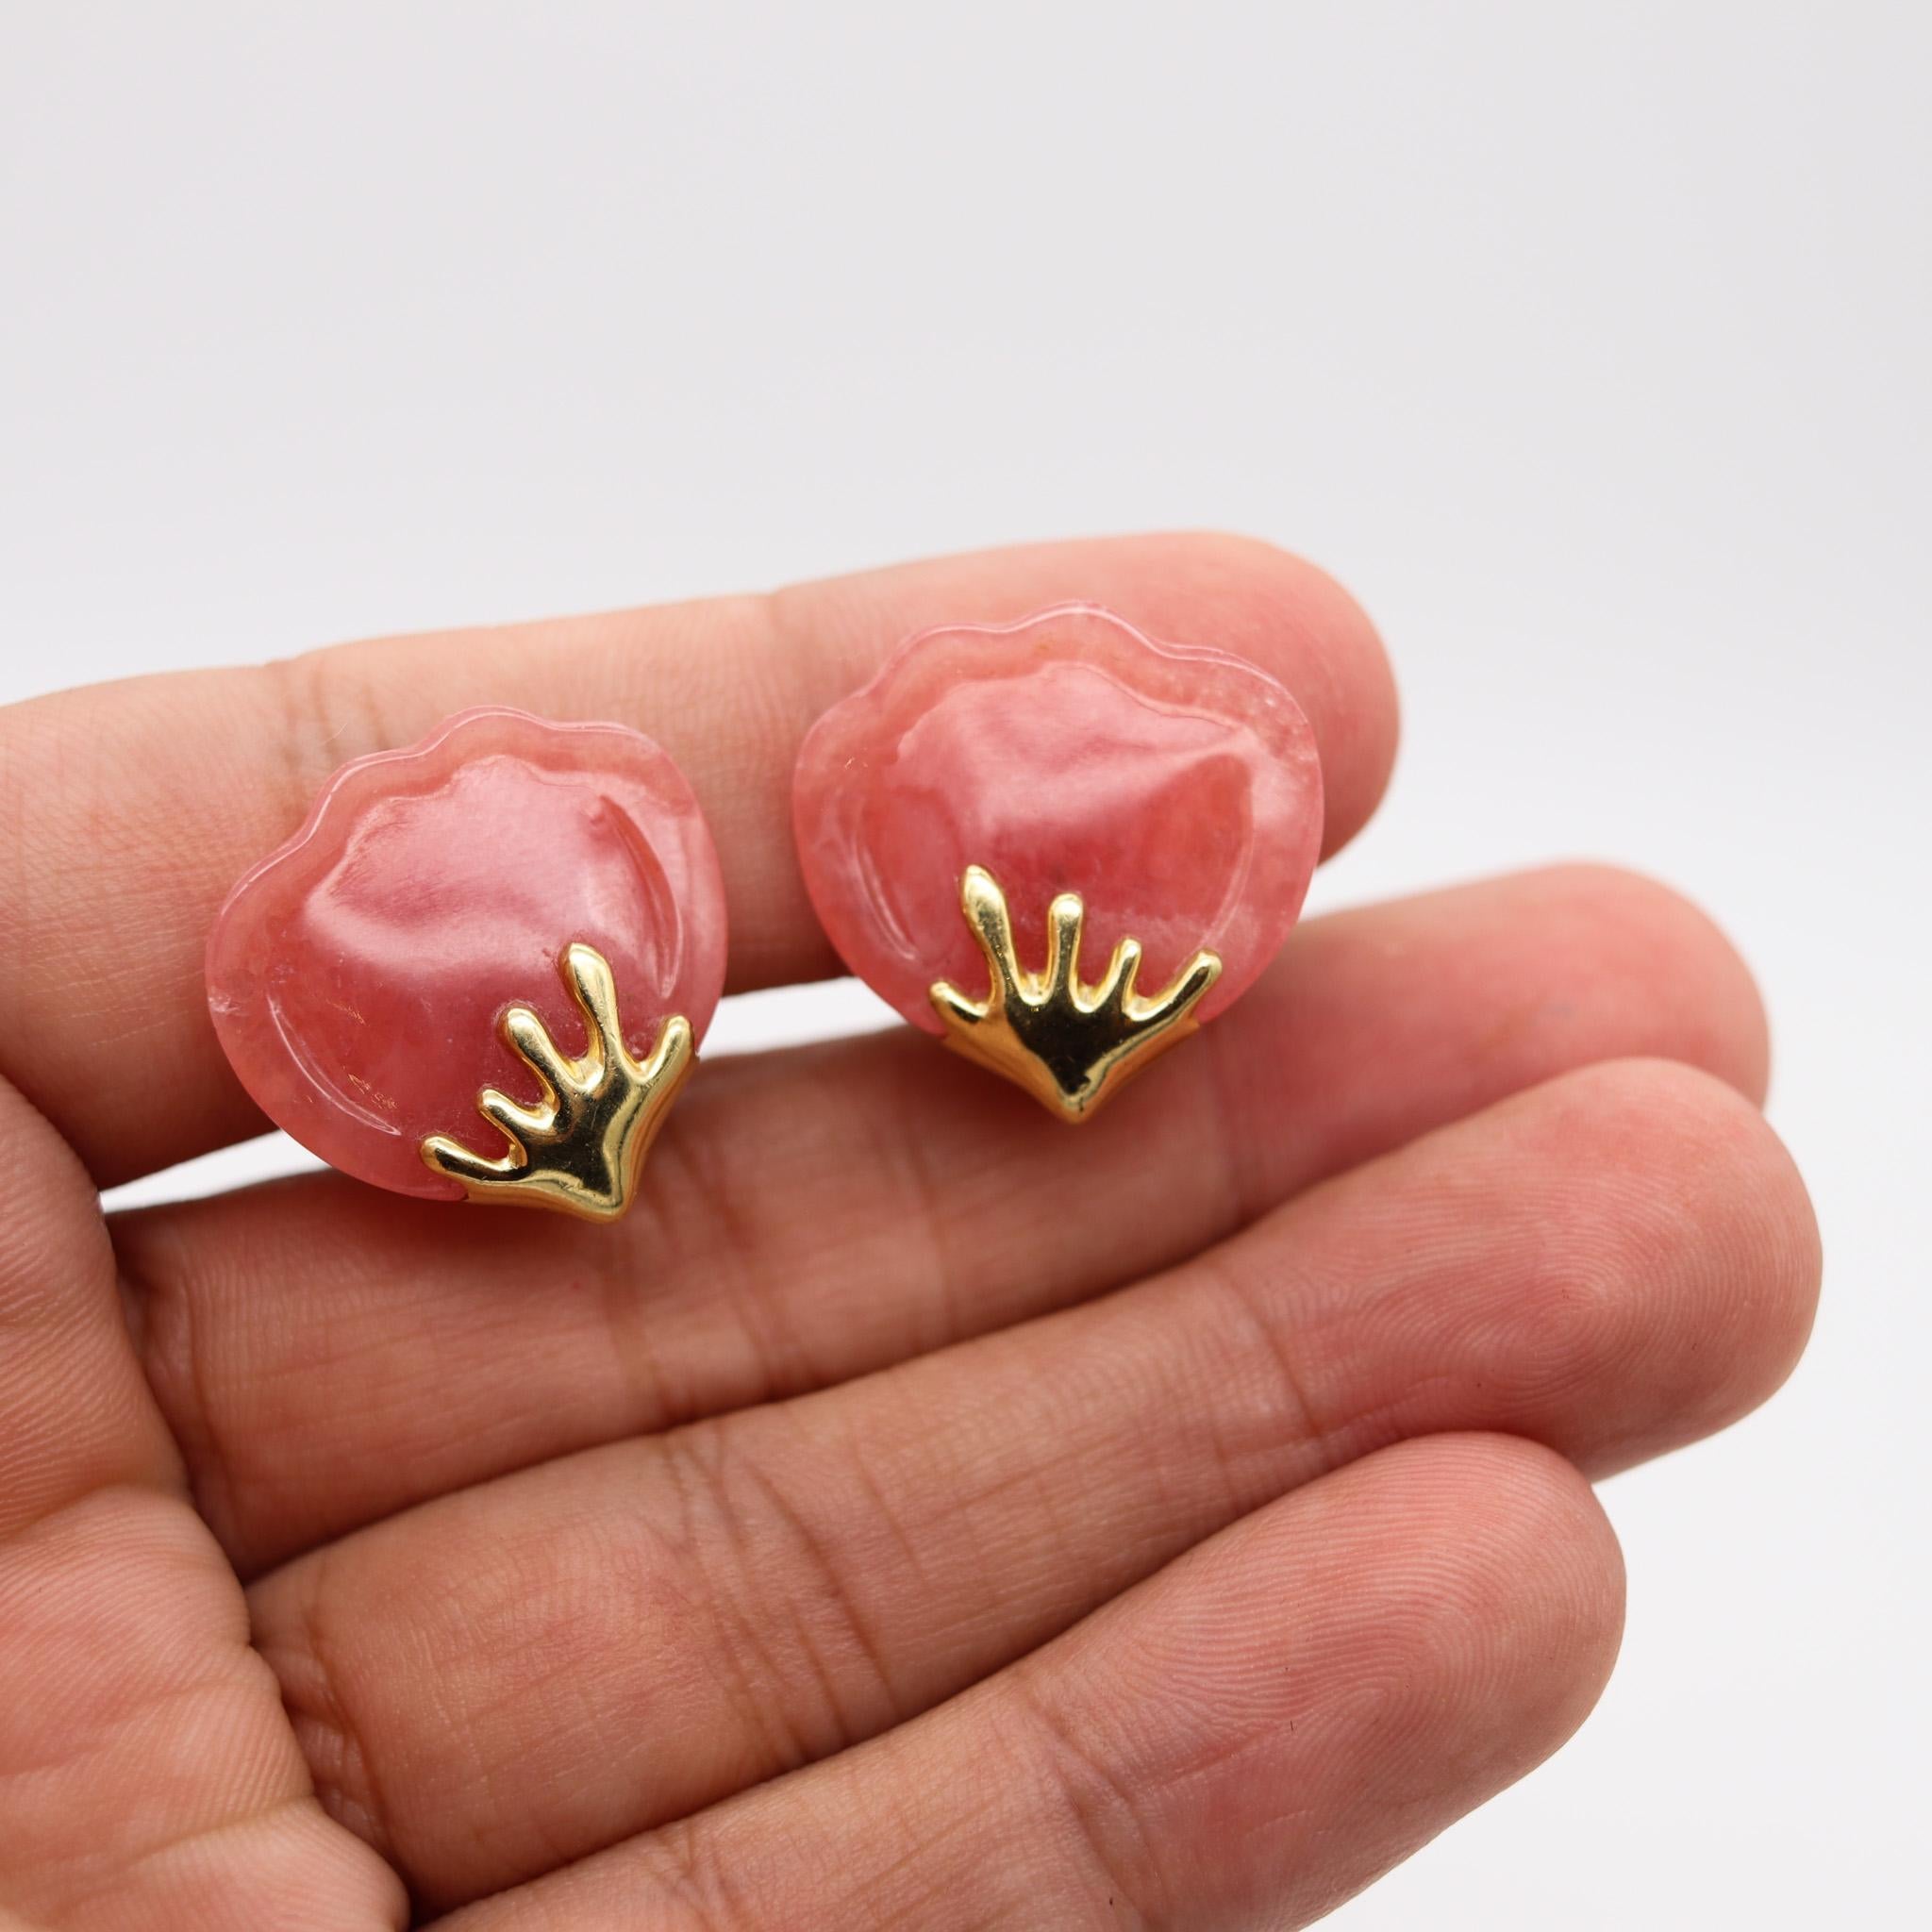 Tiffany & Co. 1977 Angela Cummings Petals Earrings 18k Gold with Rhodochrosite In Excellent Condition For Sale In Miami, FL